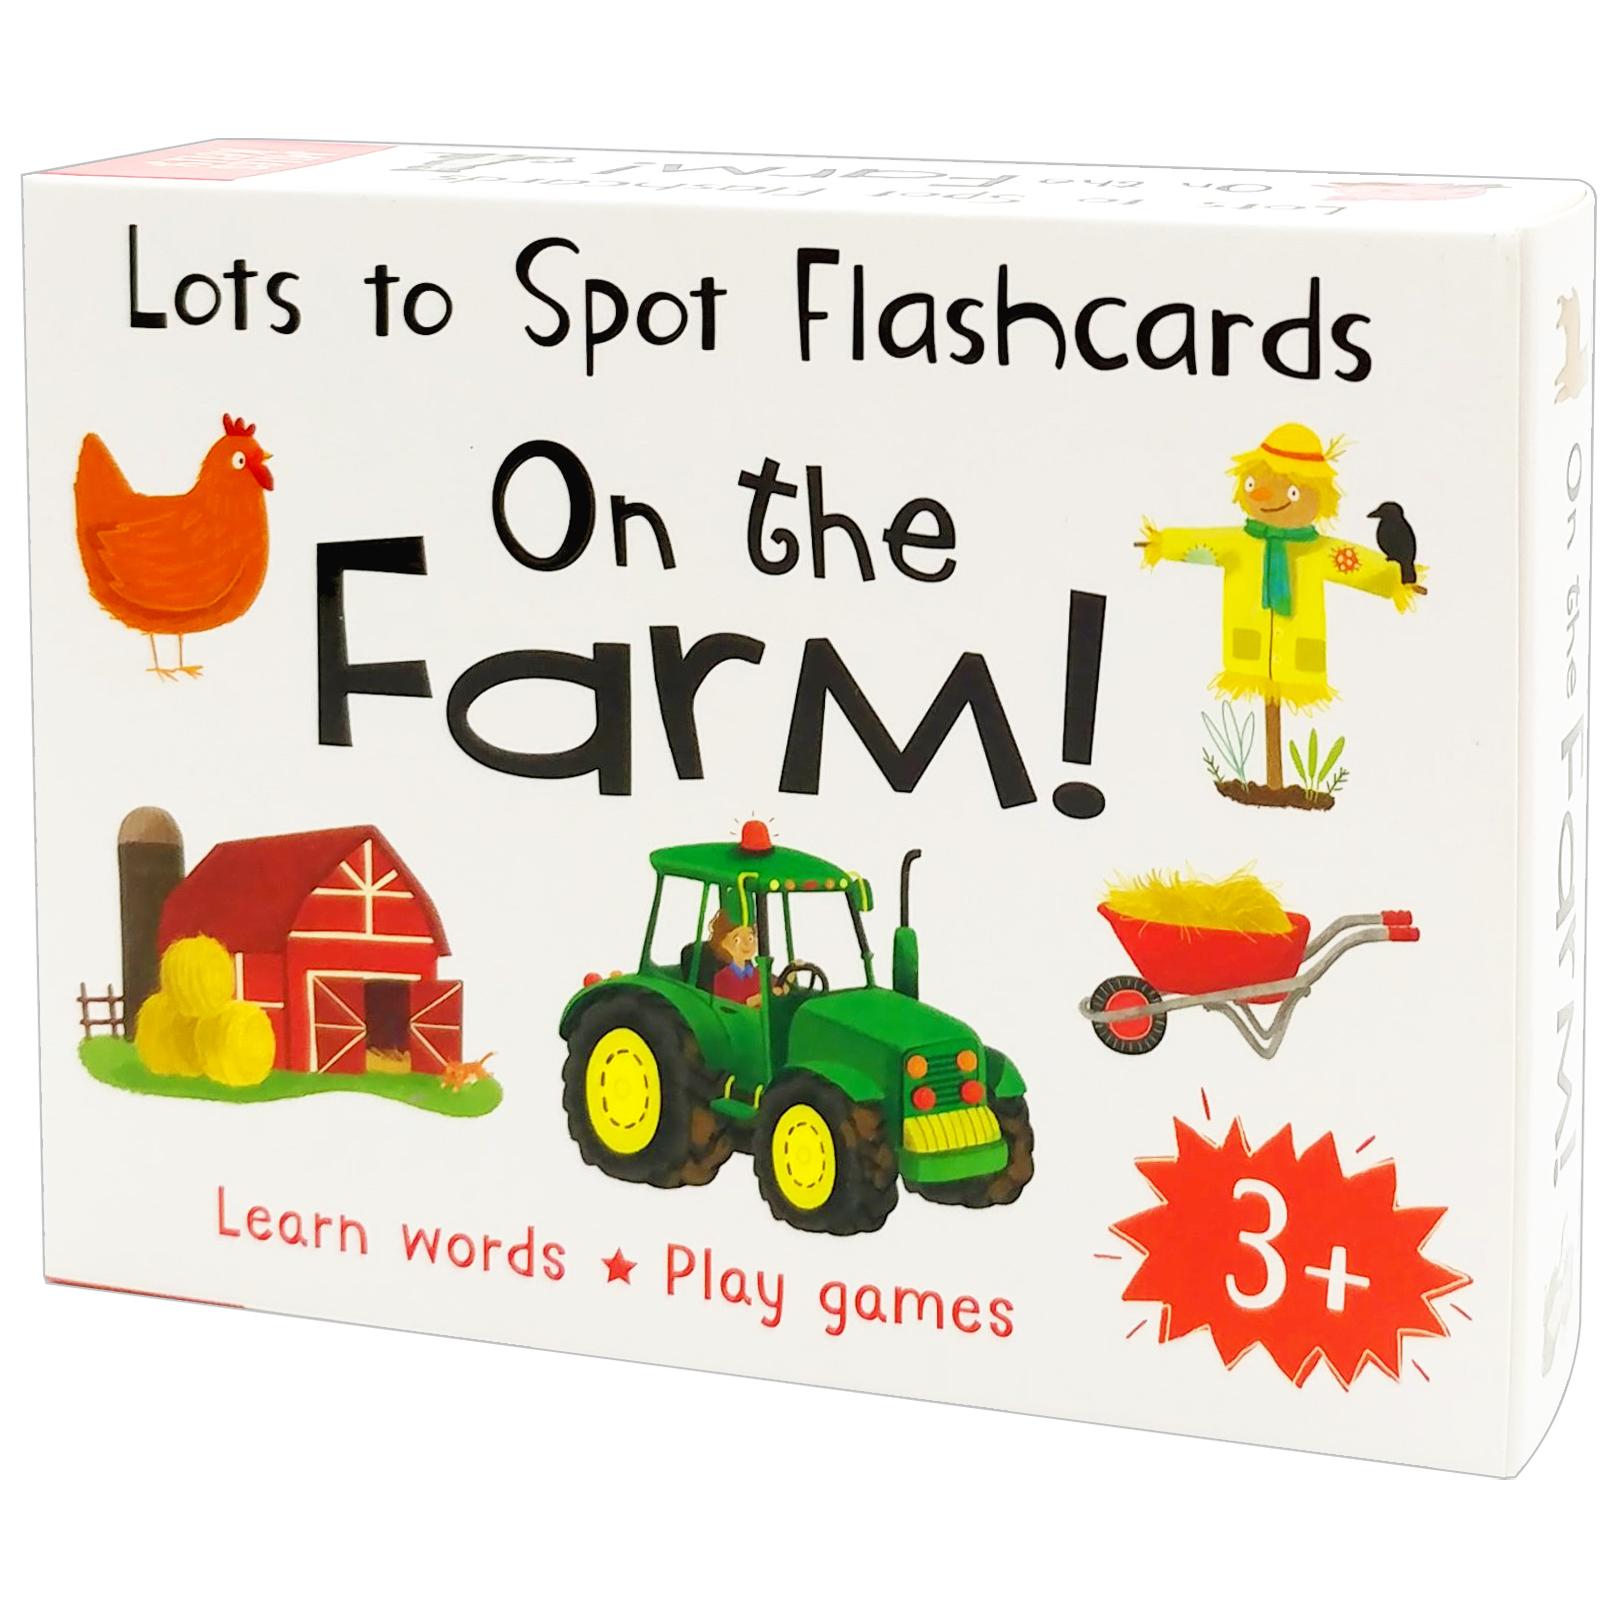 Lots To Spot Flashcards: On The Farm!